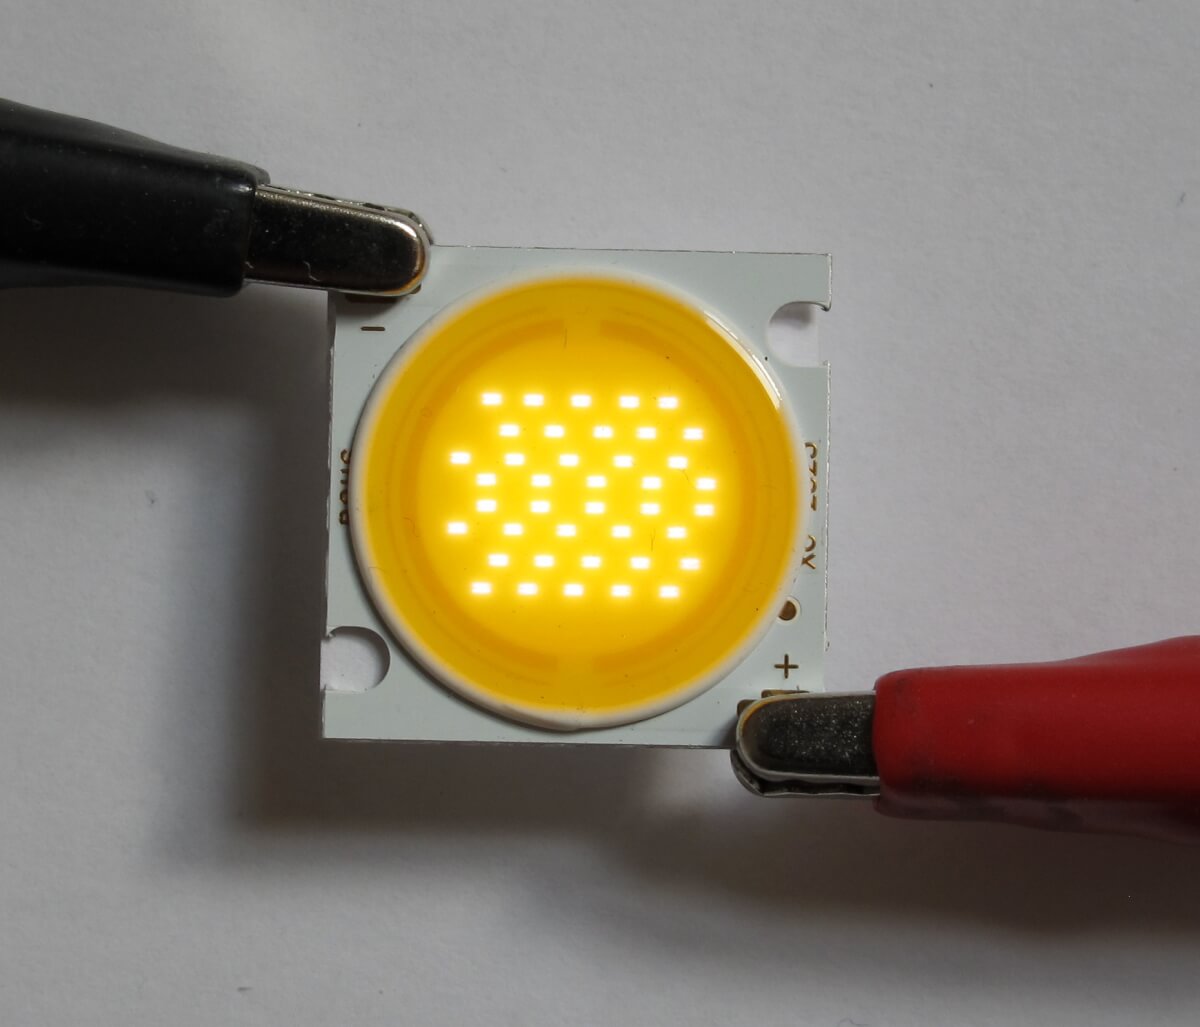 Chip on board or COB LED